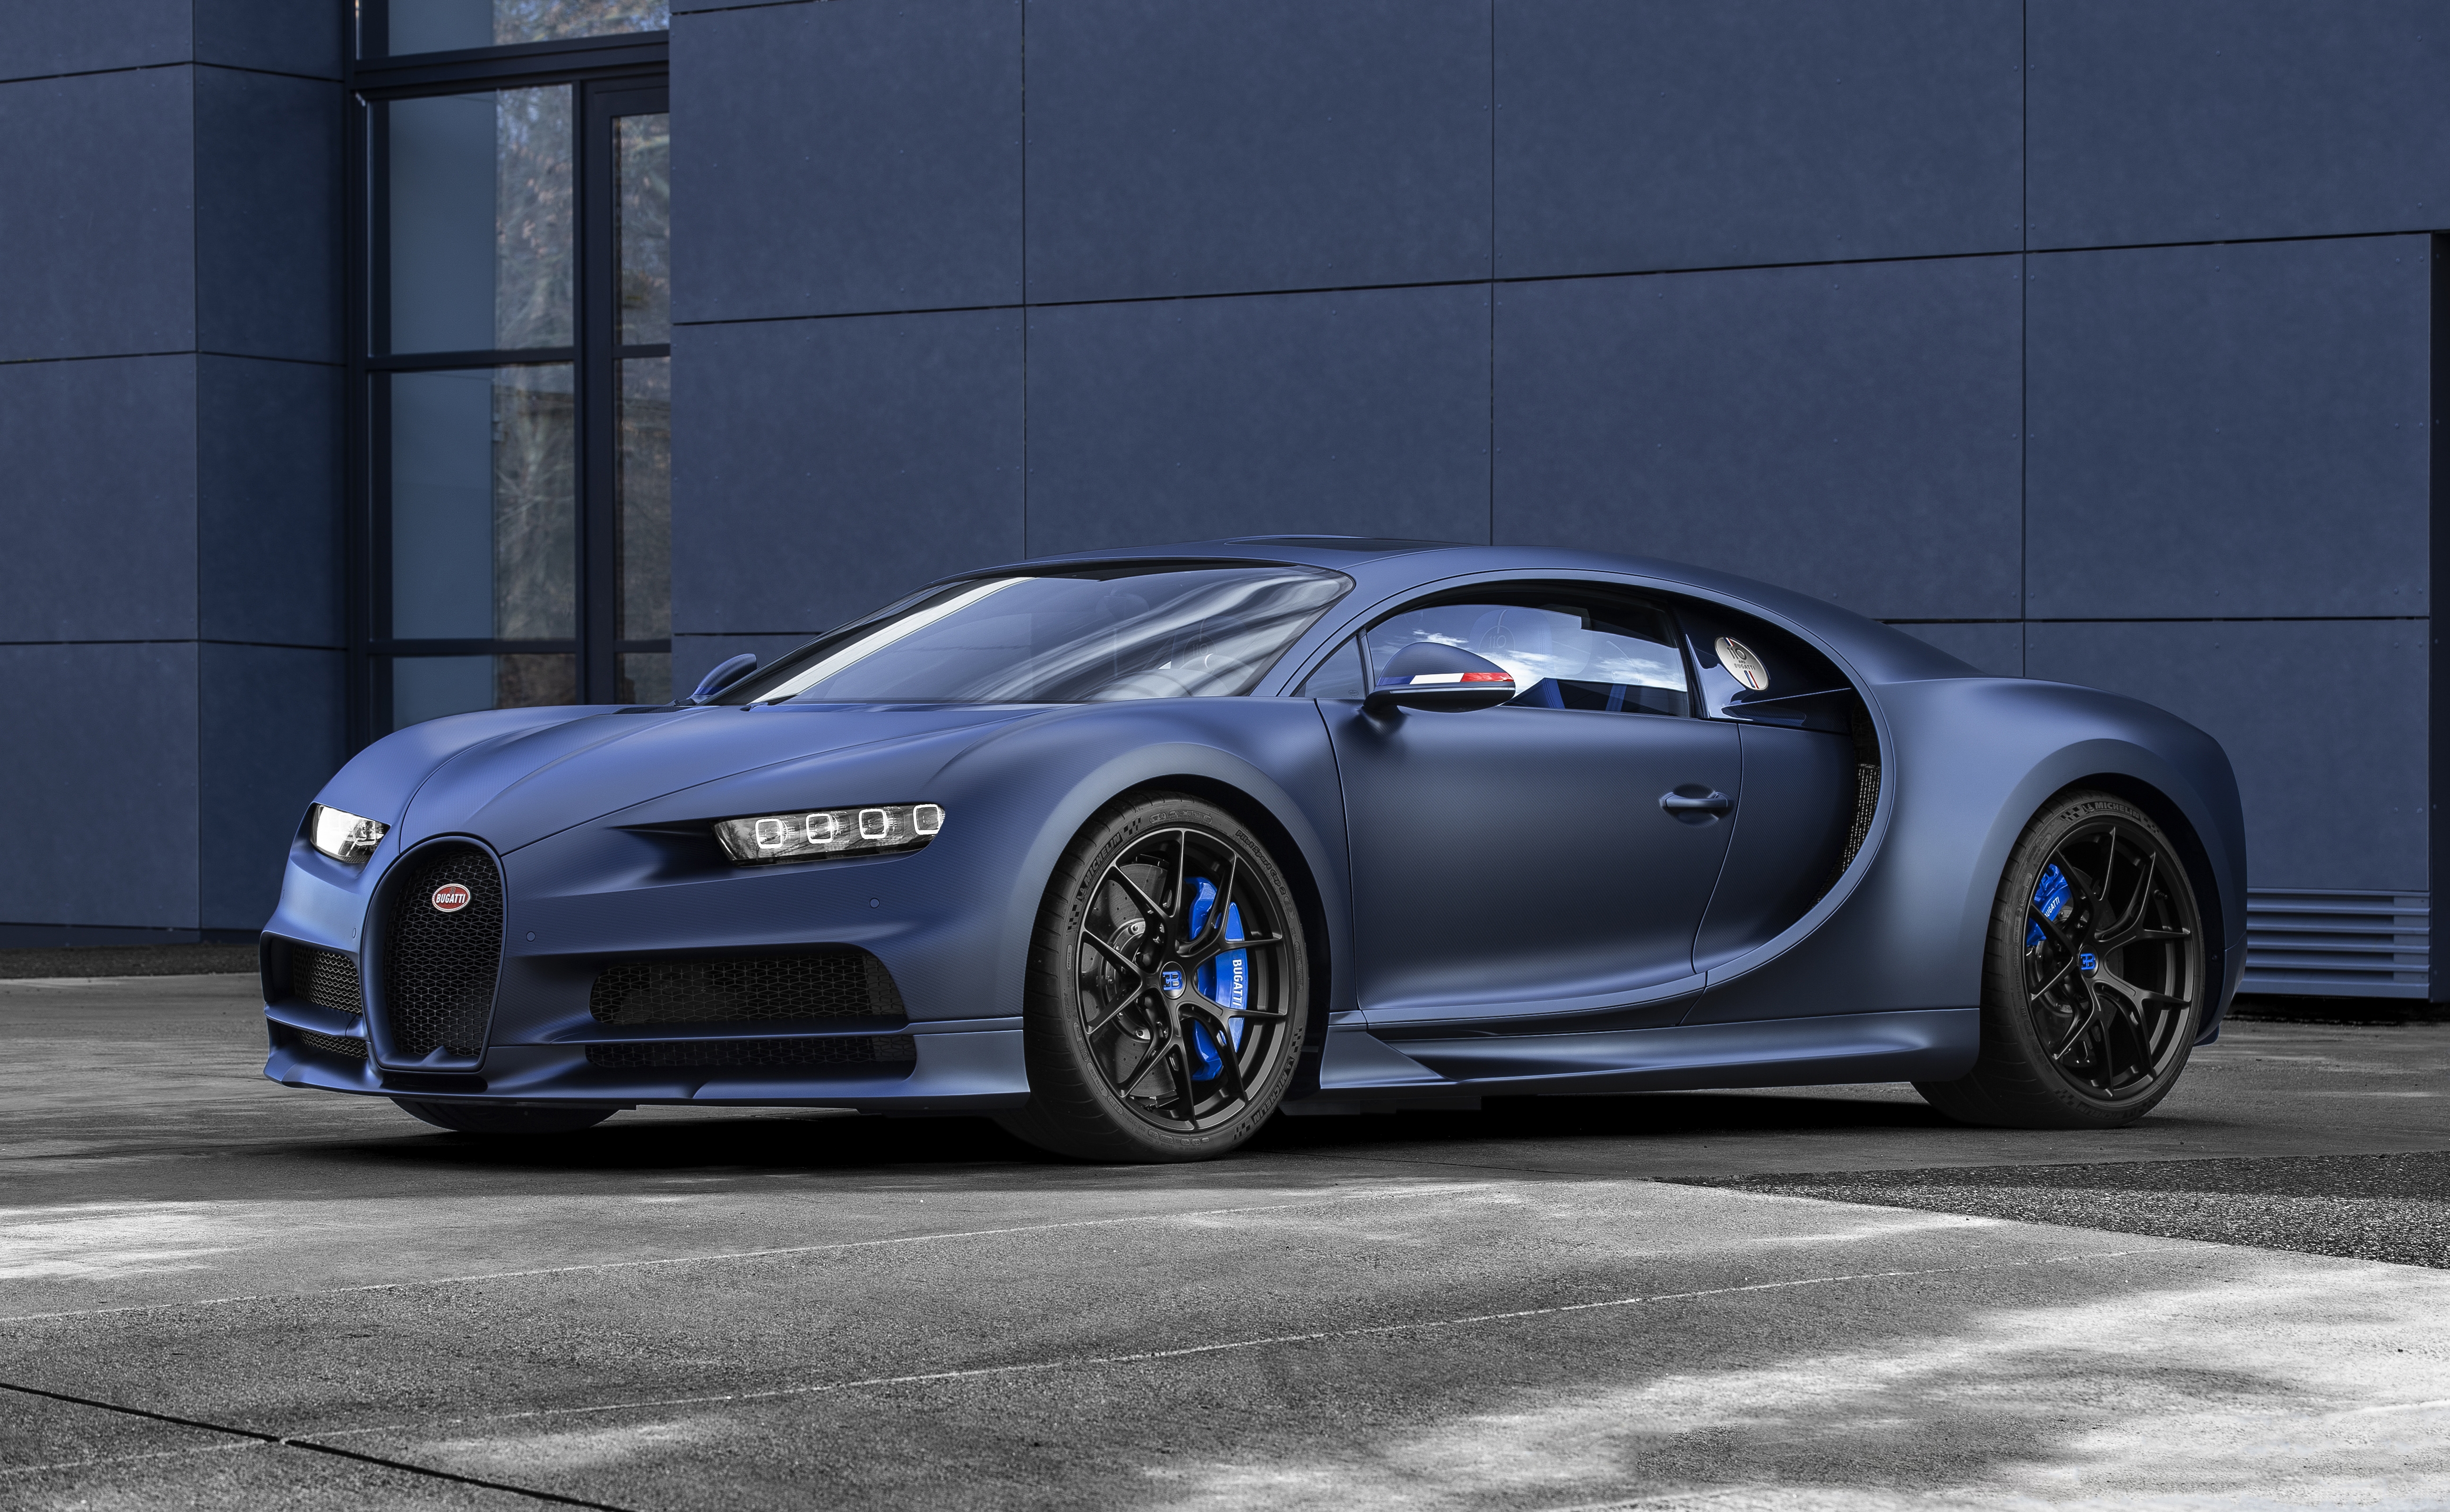 Wallpapers side view cars Bugatti on the desktop